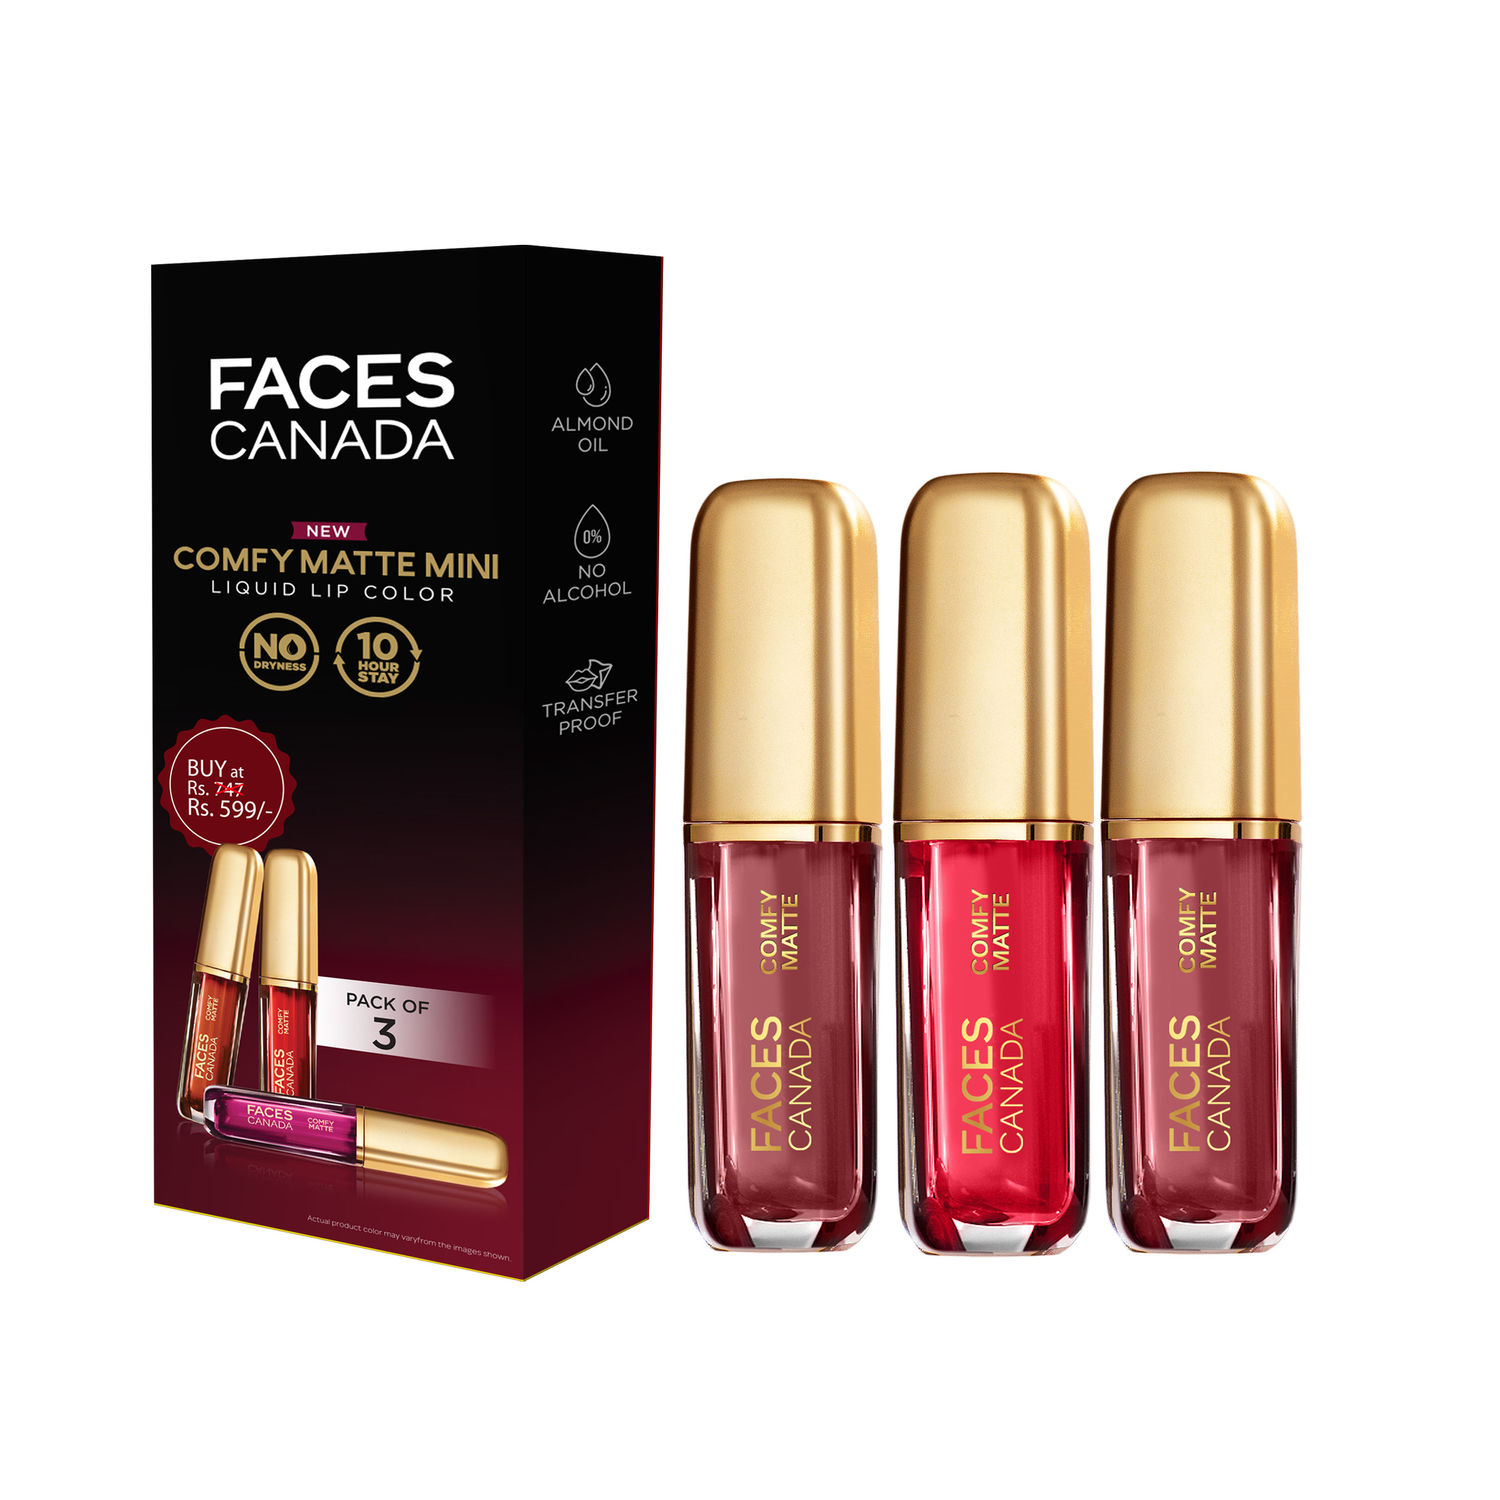 Buy FACES CANADA Comfy Matte Mini Liquid Lipstick Value Pack of 3 - Note To Self + Getting Ready + Just So You Know | 3.6 ml | Comfortable 10HR Longstay | Smooth Intense Matte Color | No Dryness - Purplle